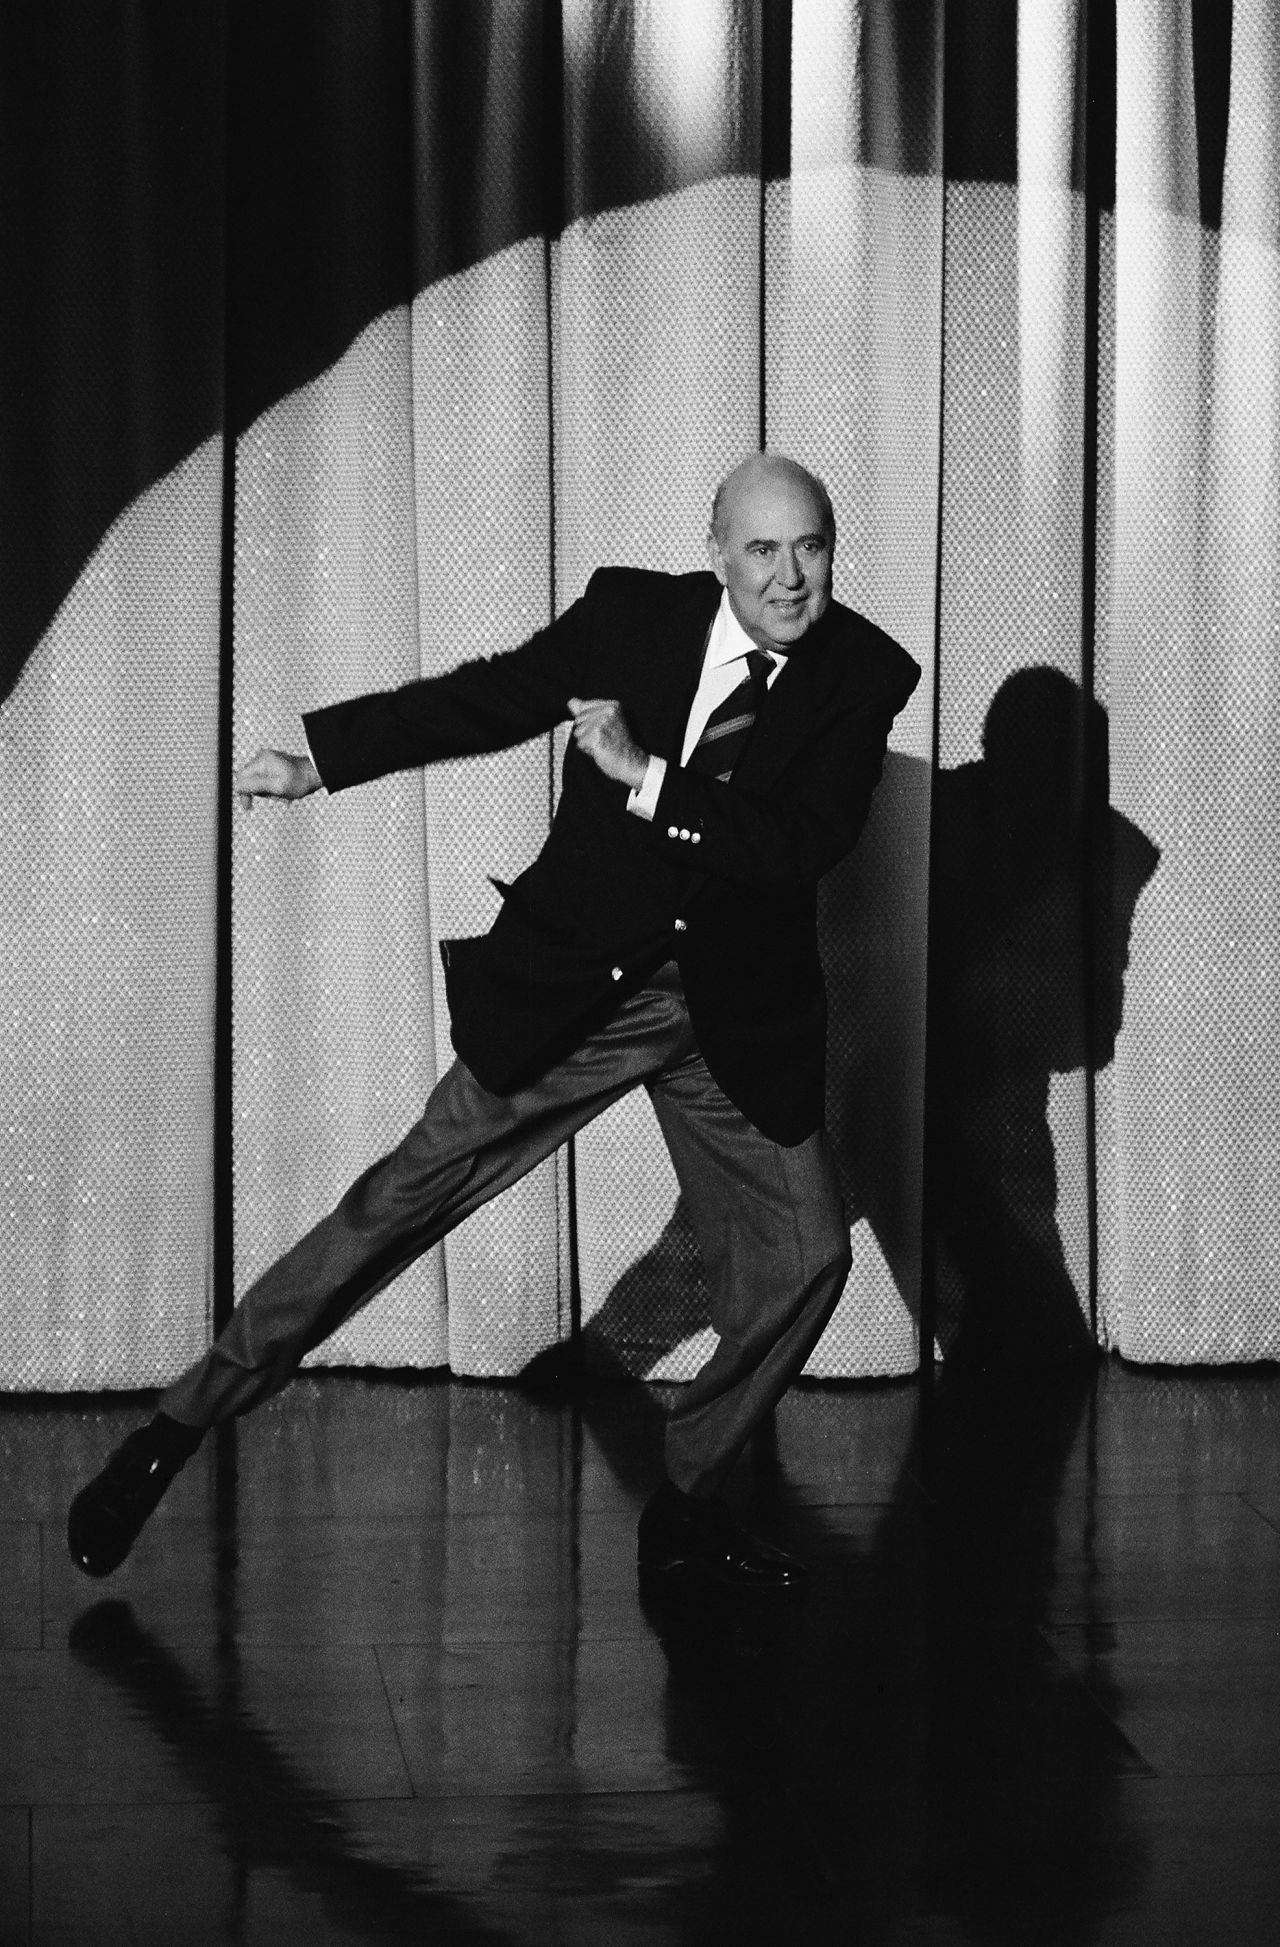 Reiner performs on "The Tonight Show Starring Johnny Carson" in November 1990.